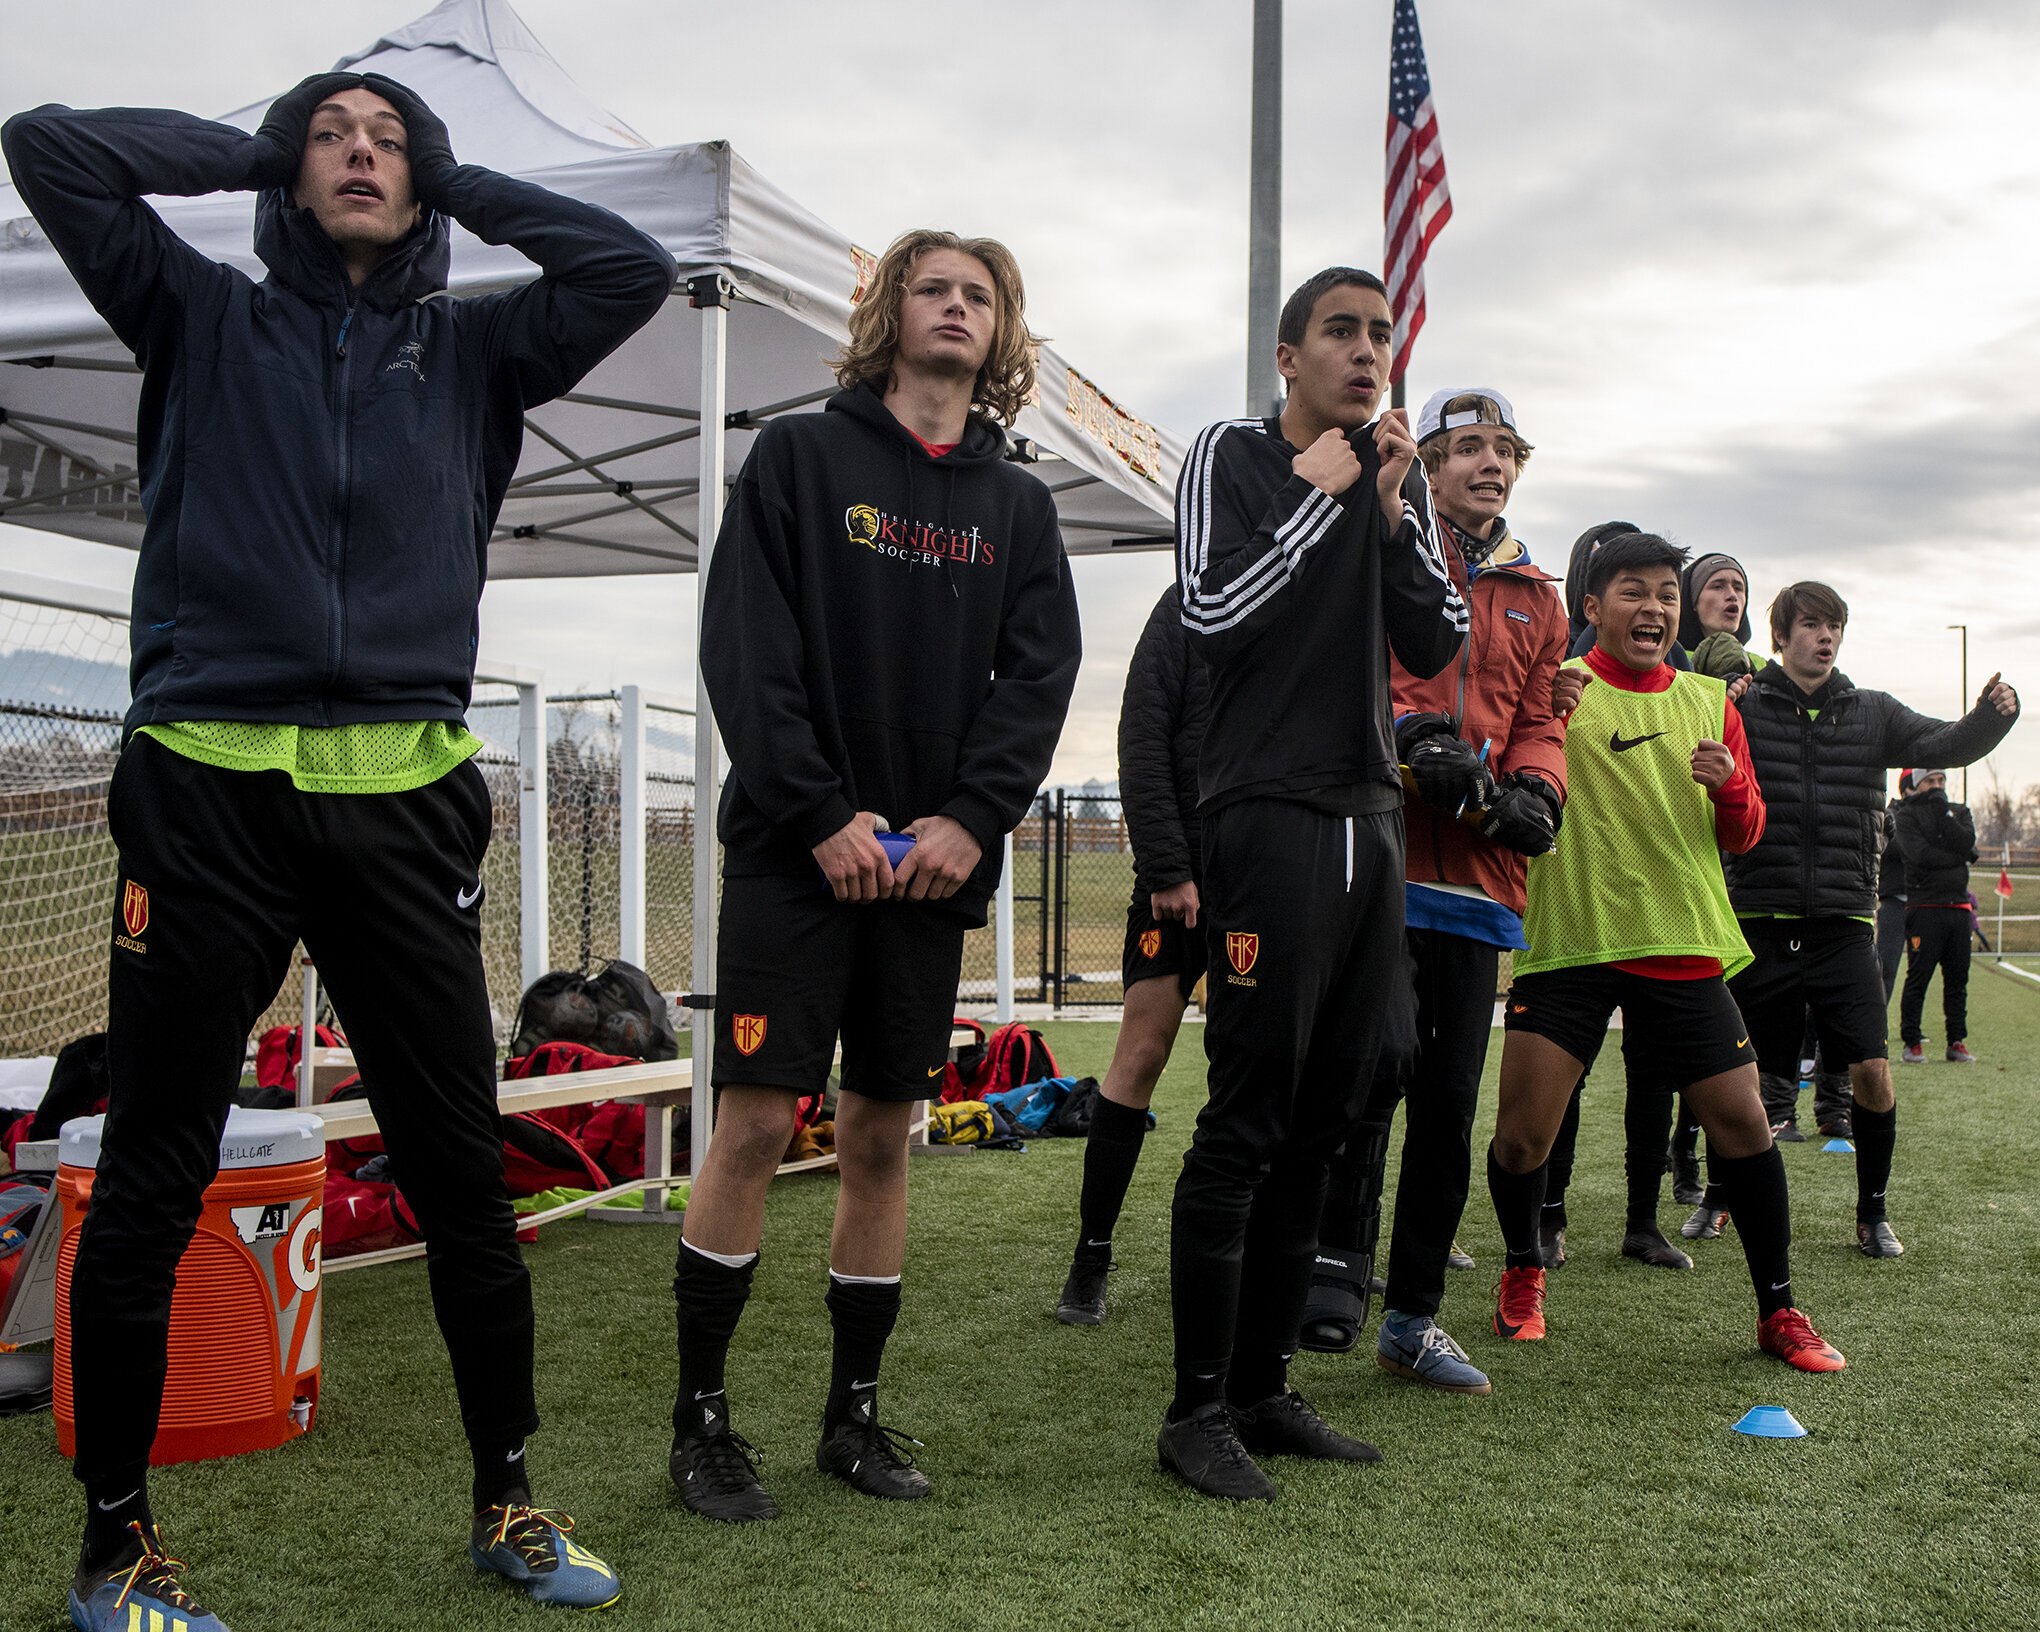  Hellgate soccer players watch anxiously of their team's attack from the sideline during their Class AA state final match against Bozeman at Fort Missoula, Nov. 2, 2019 in Missoula, Mont. 